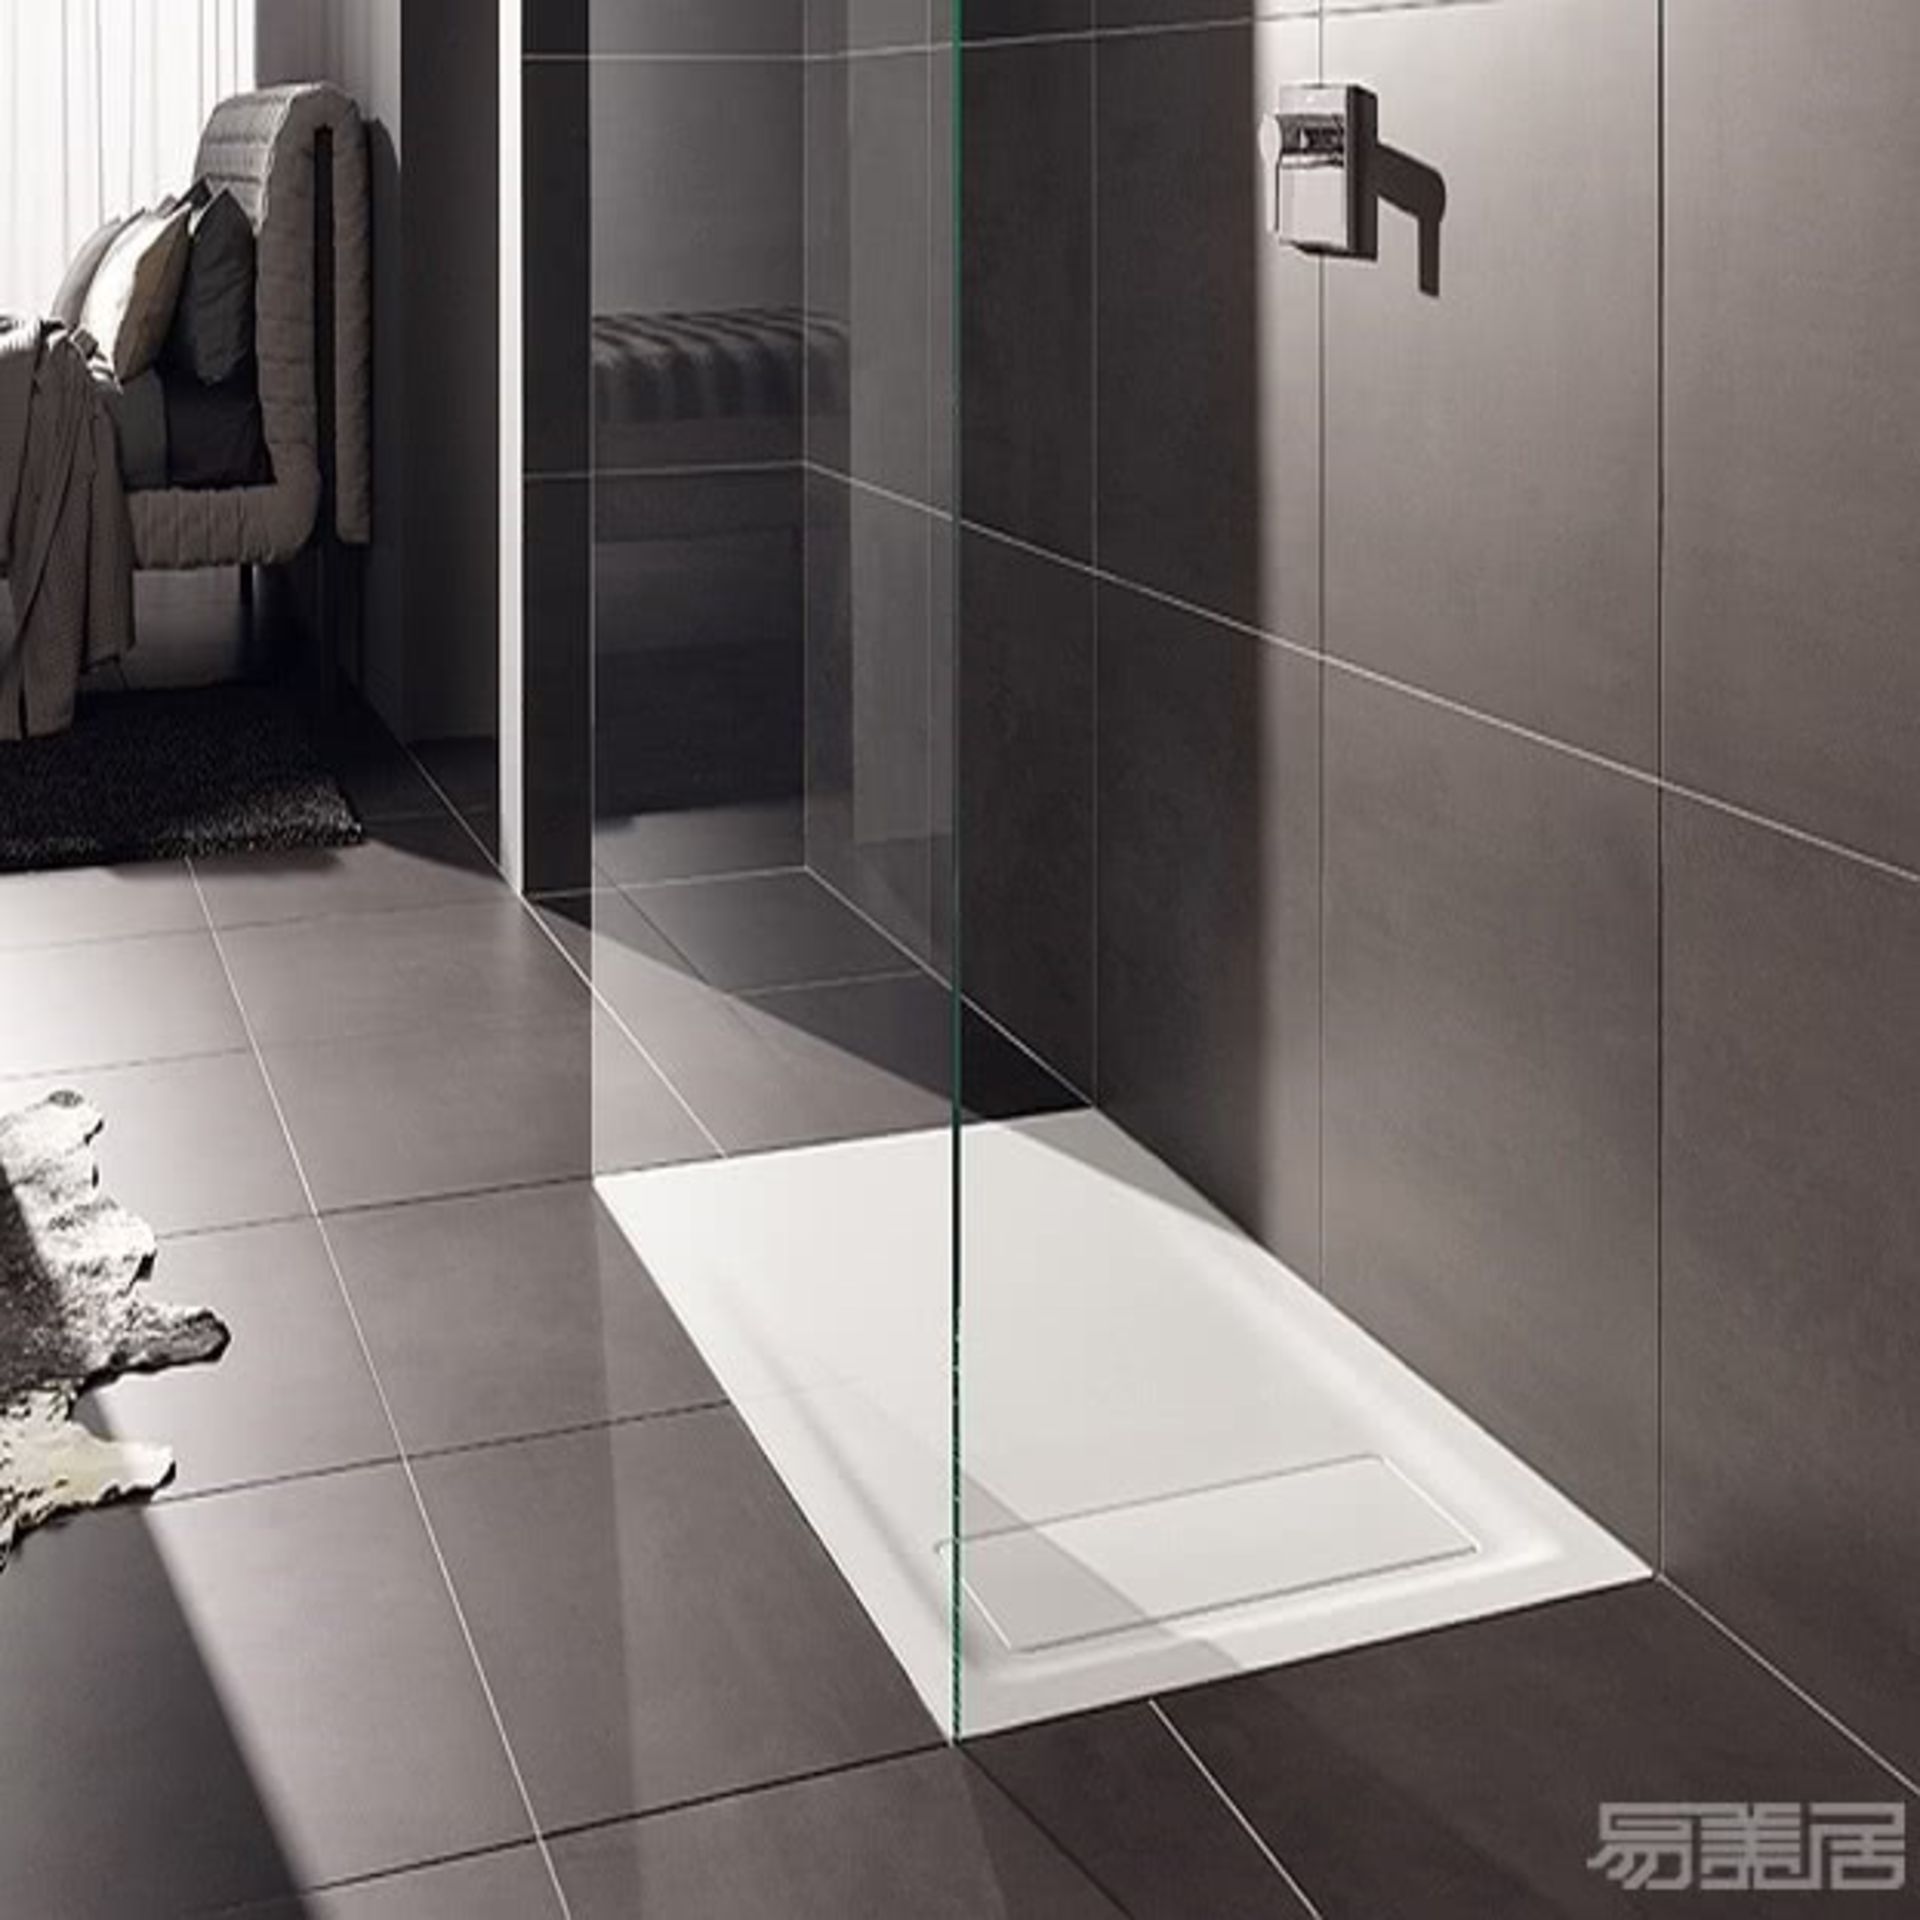 (LV102) Keramag 1200x900mm Opale White Shower Tray. RRP £1,479.99.Opale is sober, slender and ...